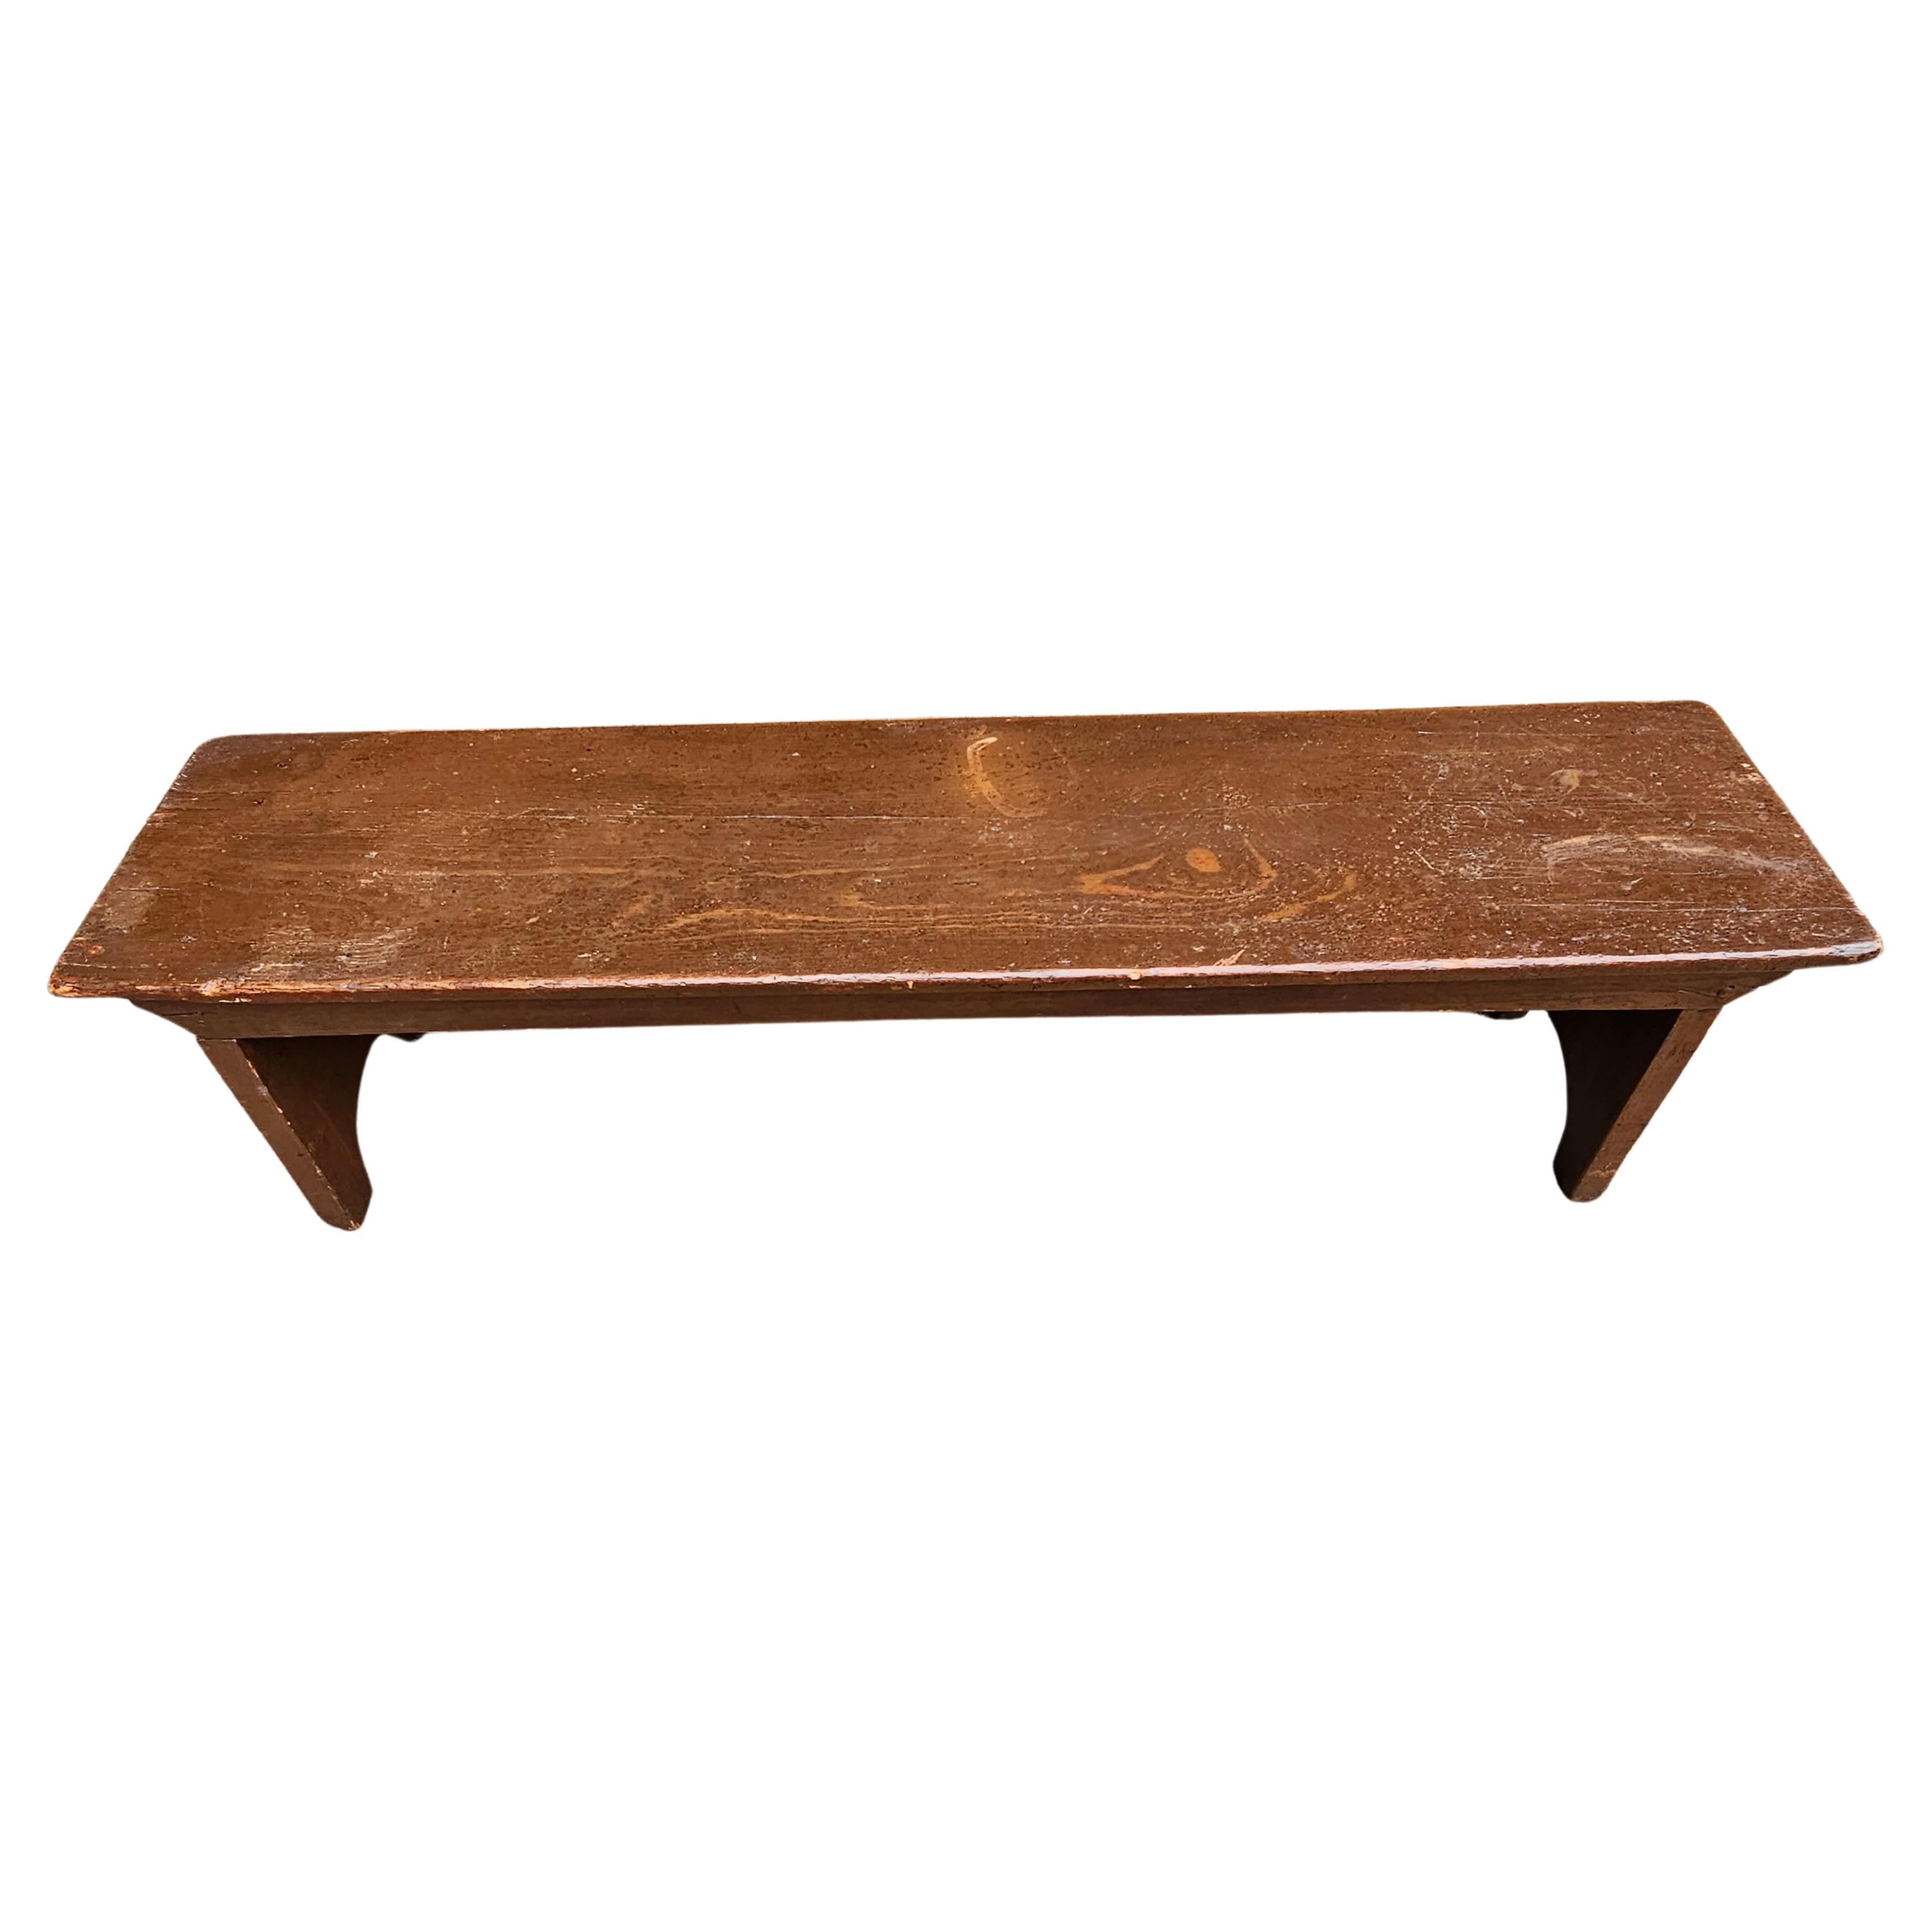 An Early 20th Century Handcrafted American Colonial Elm Low Bench. Measures 41.5